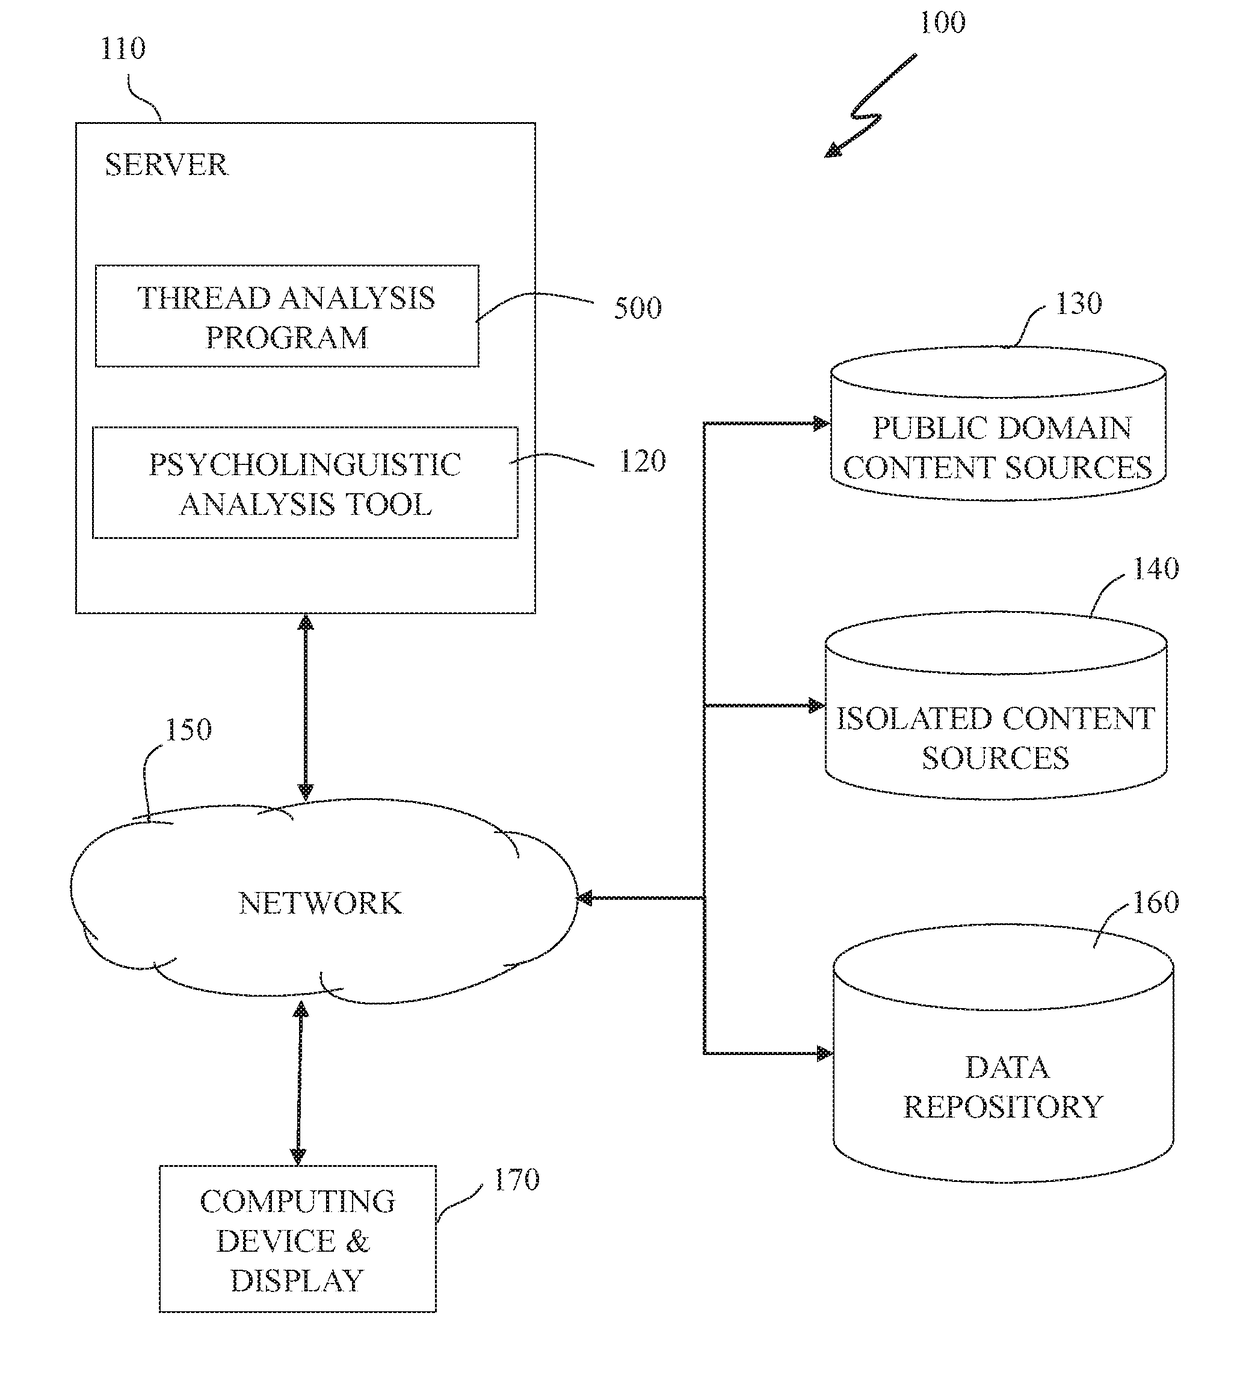 Determining user influence by contextual relationship of isolated and non-isolated content